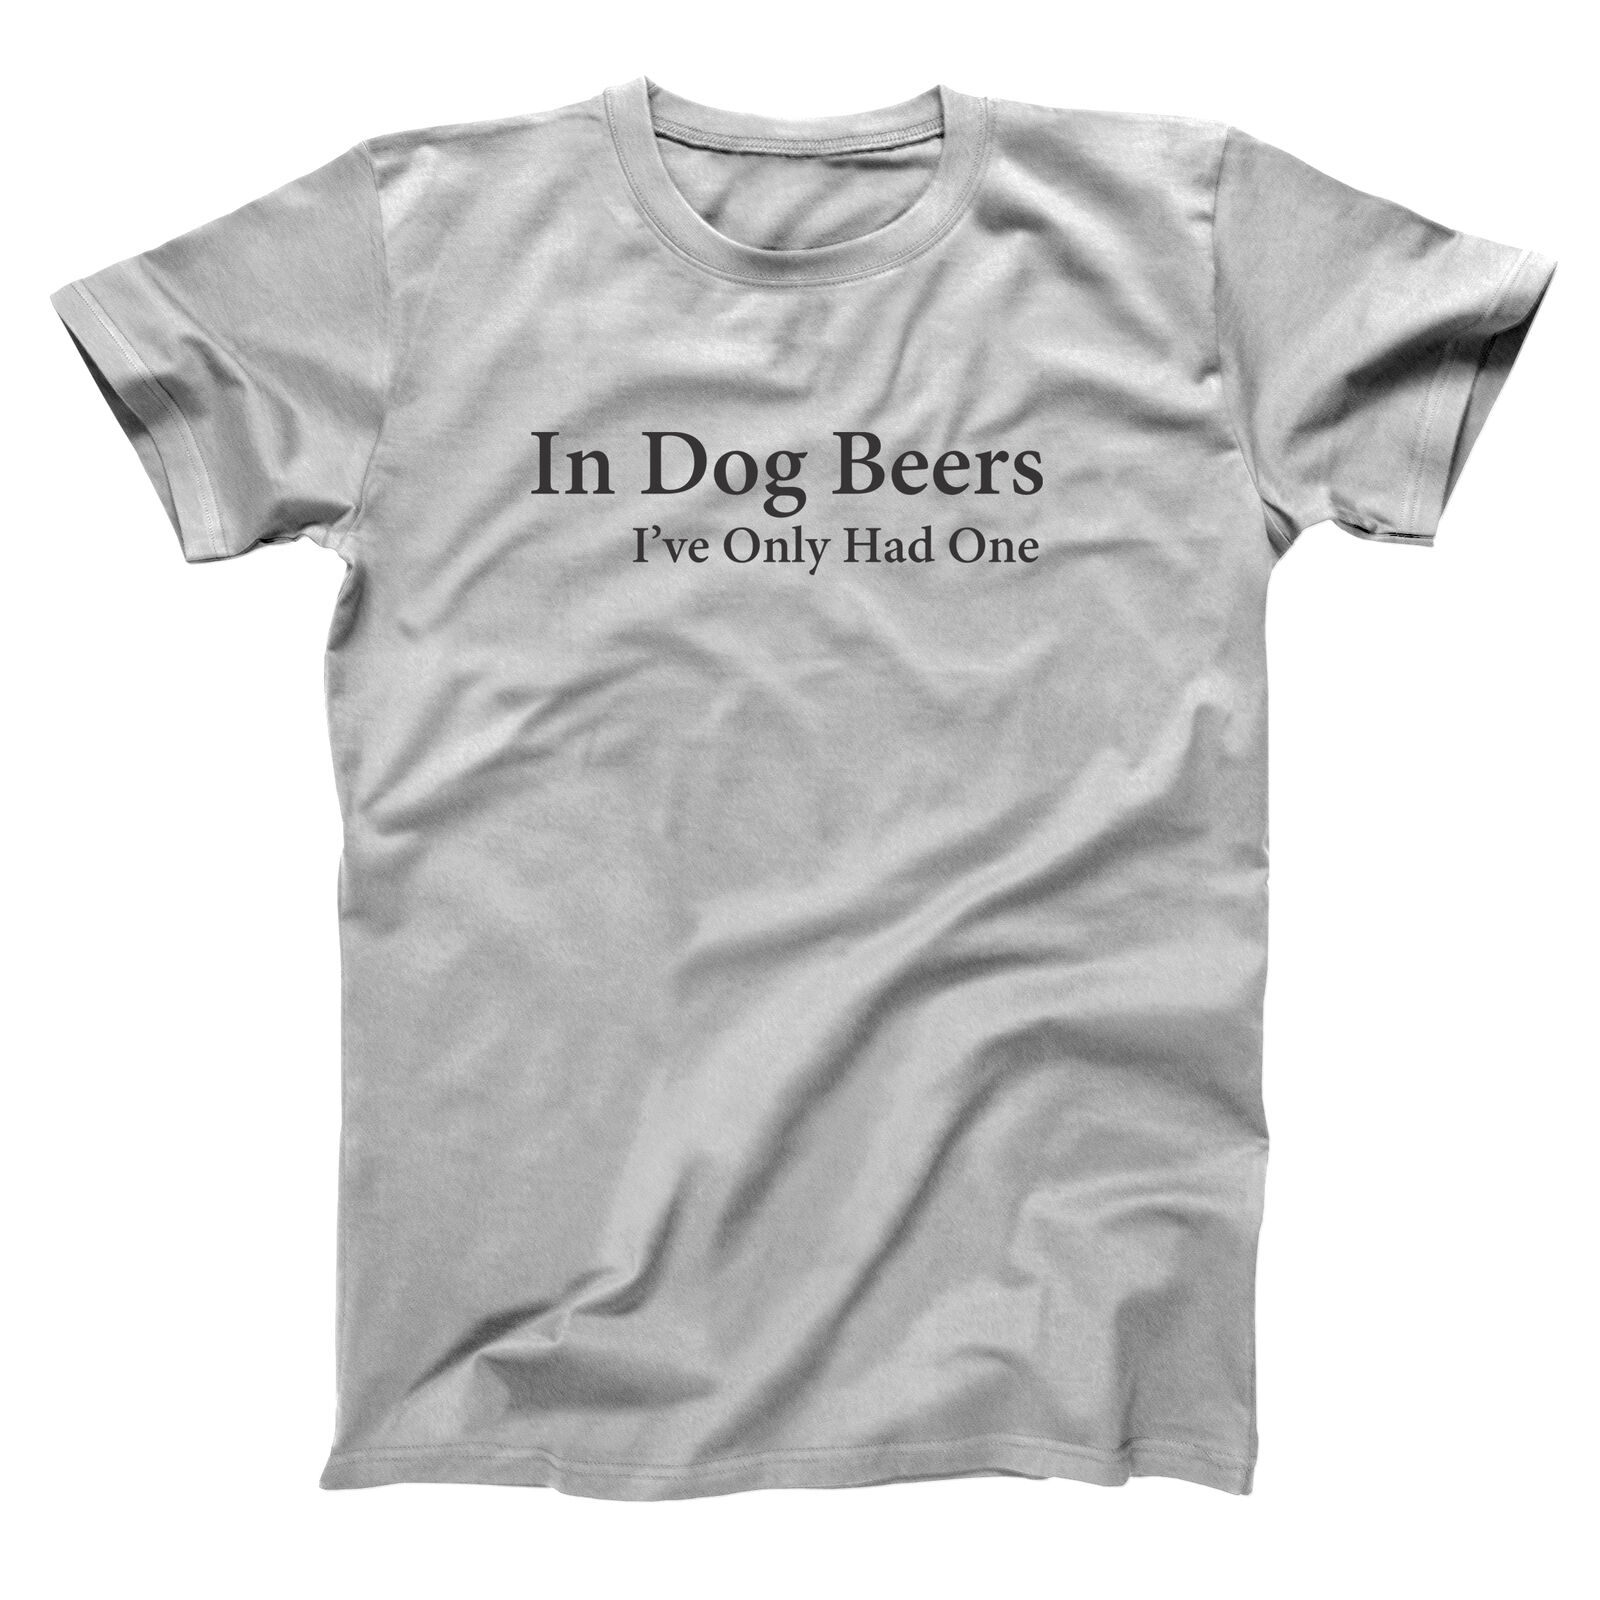 In Dog Beers Funny  Drinking  Humor  Party Gray Basic Men's T-Shirt